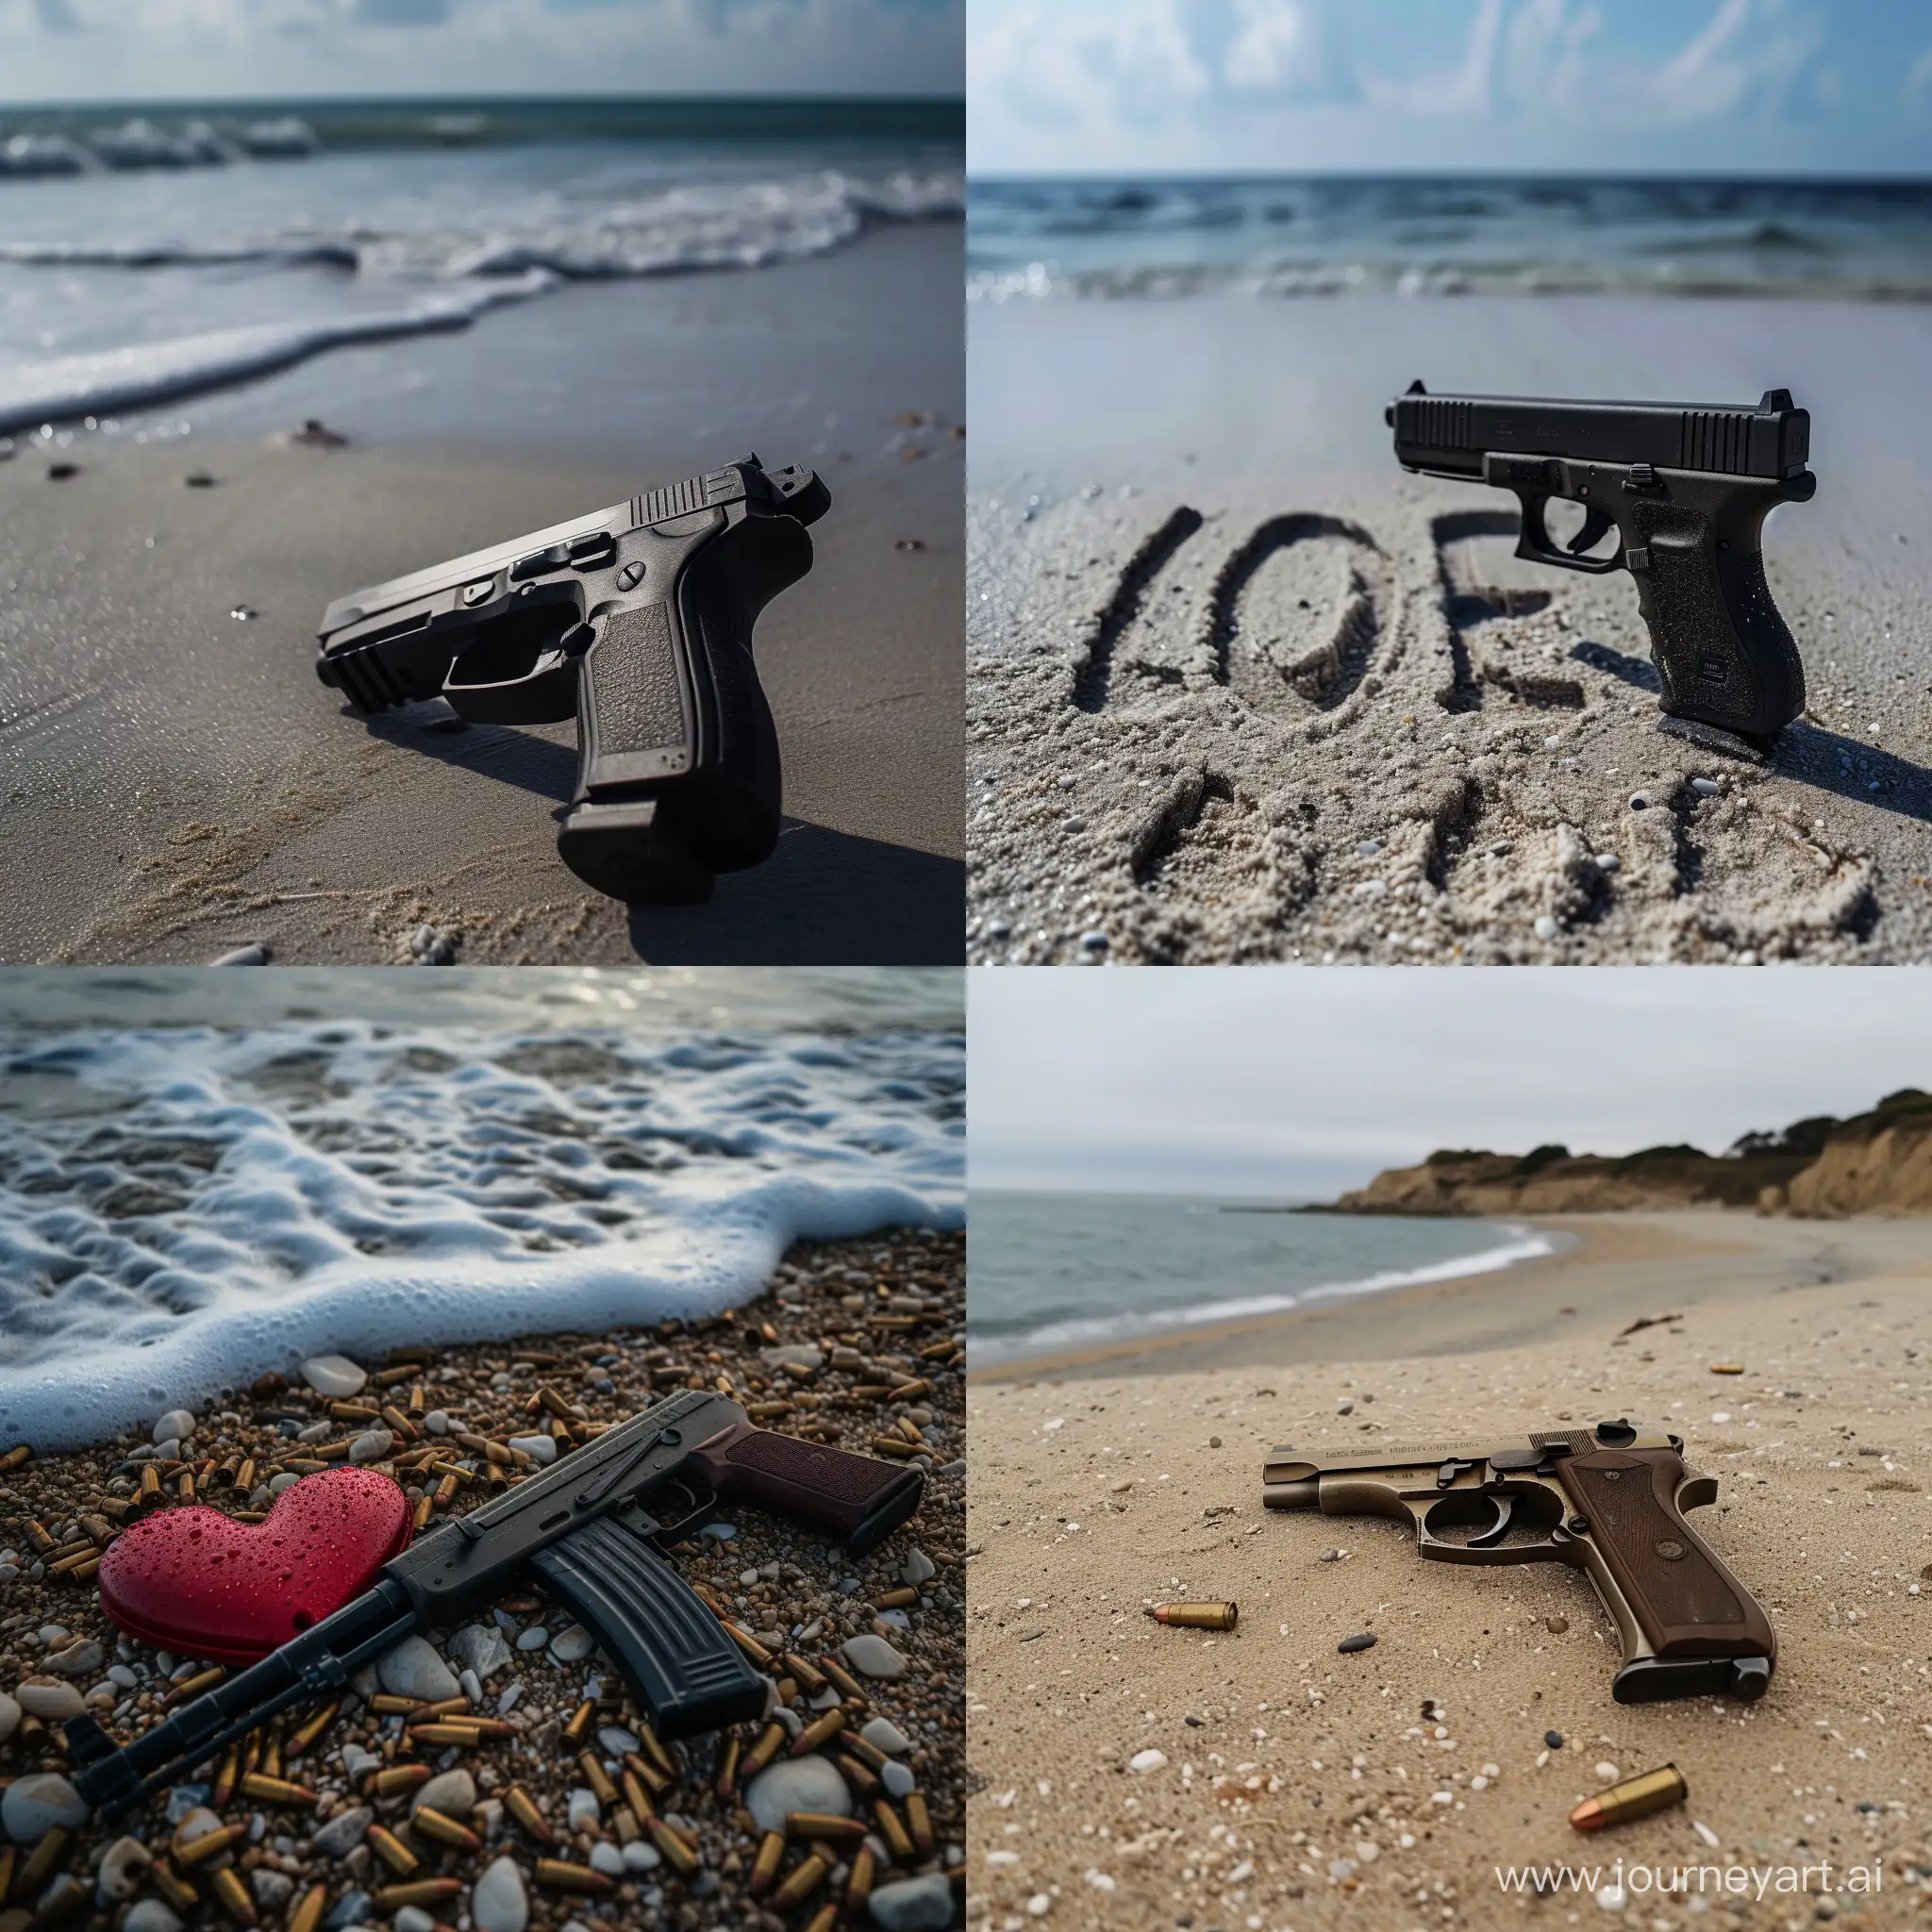 Romantic-Seaside-Sunset-with-Firearms-Silhouettes